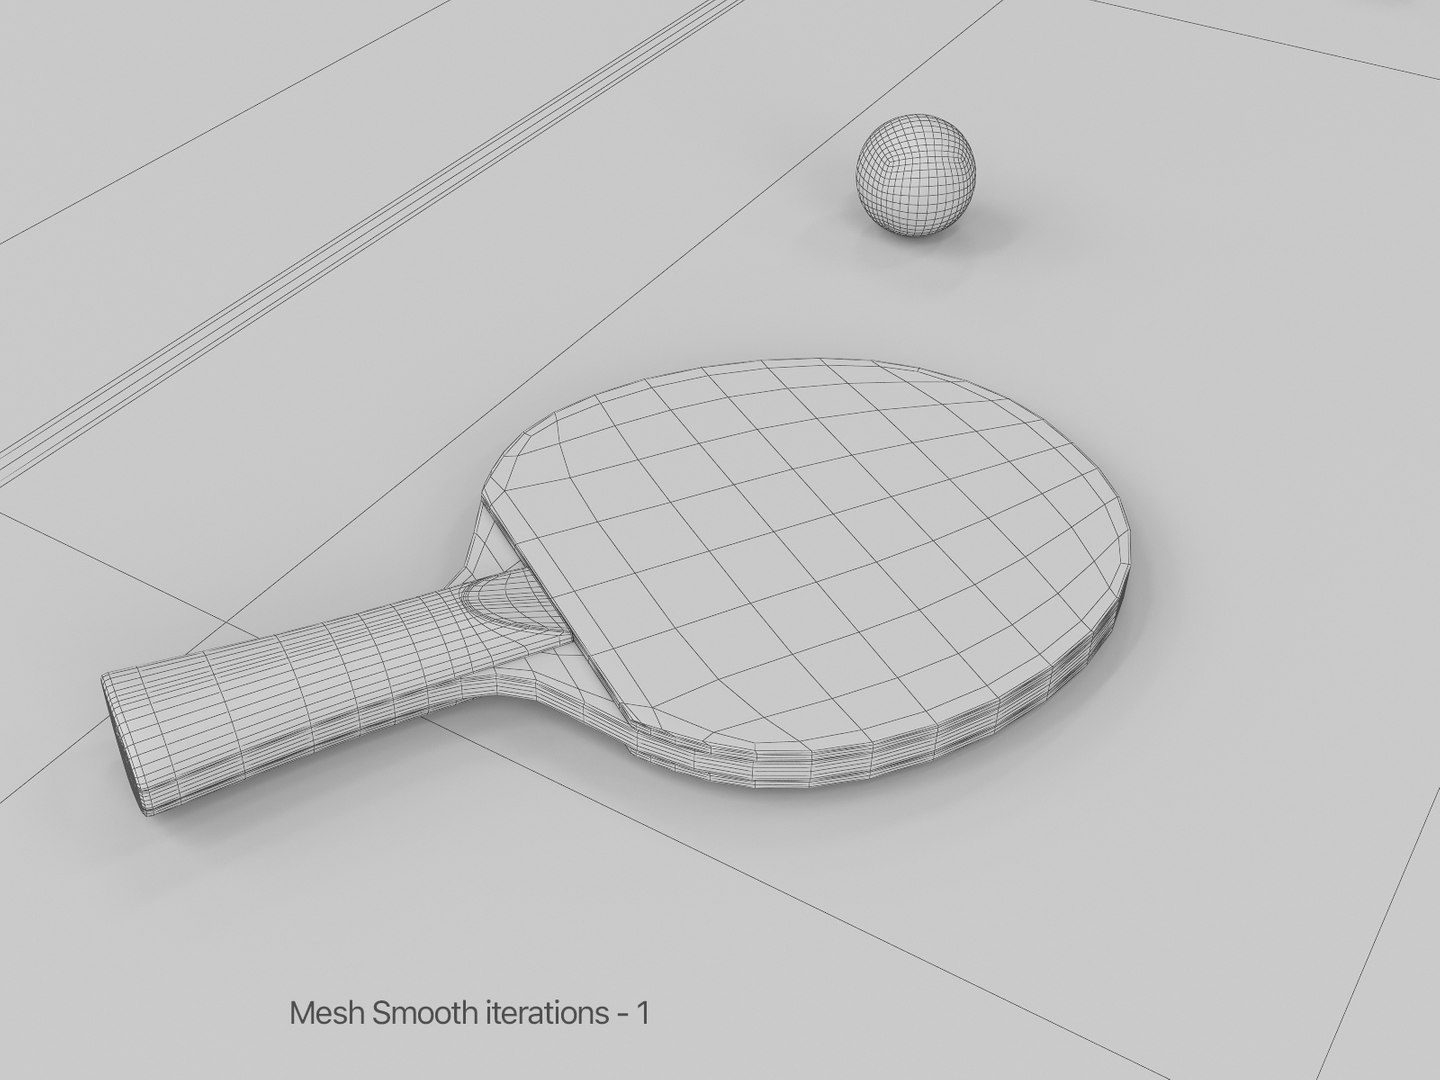 Killerspin Ping Pong Table 3D Model - TurboSquid 1383340